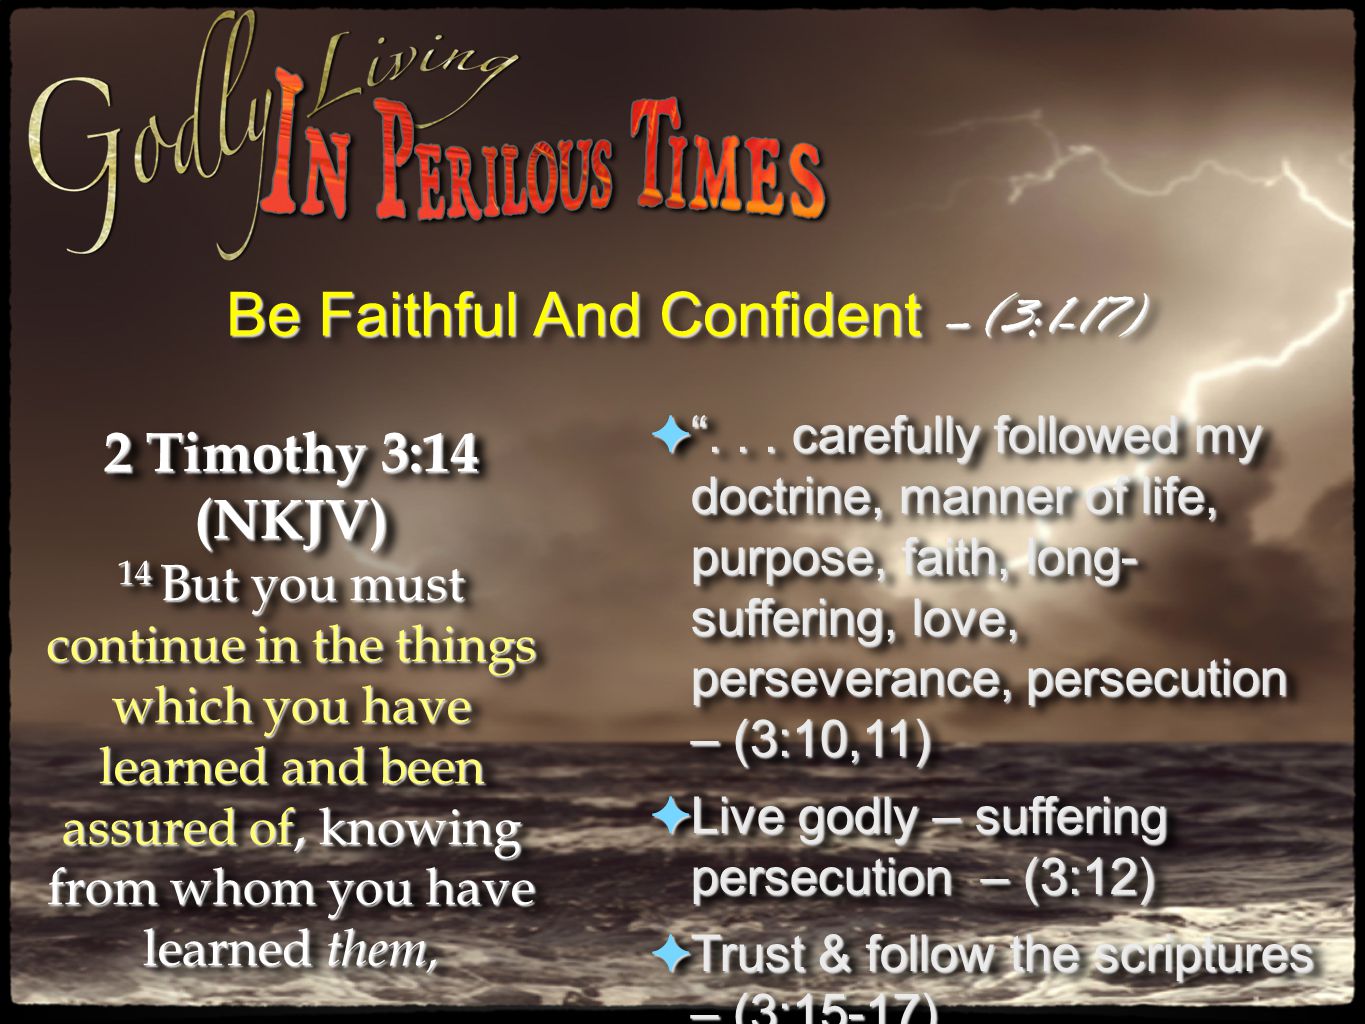 Be Faithful And Confident –(3:1-17) 2 Timothy 3:14 (NKJV) 14 But you must continue in the things which you have learned and been assured of, knowing from whom you have learned them, 2 Timothy 3:14 (NKJV) 14 But you must continue in the things which you have learned and been assured of, knowing from whom you have learned them, ✦ ...